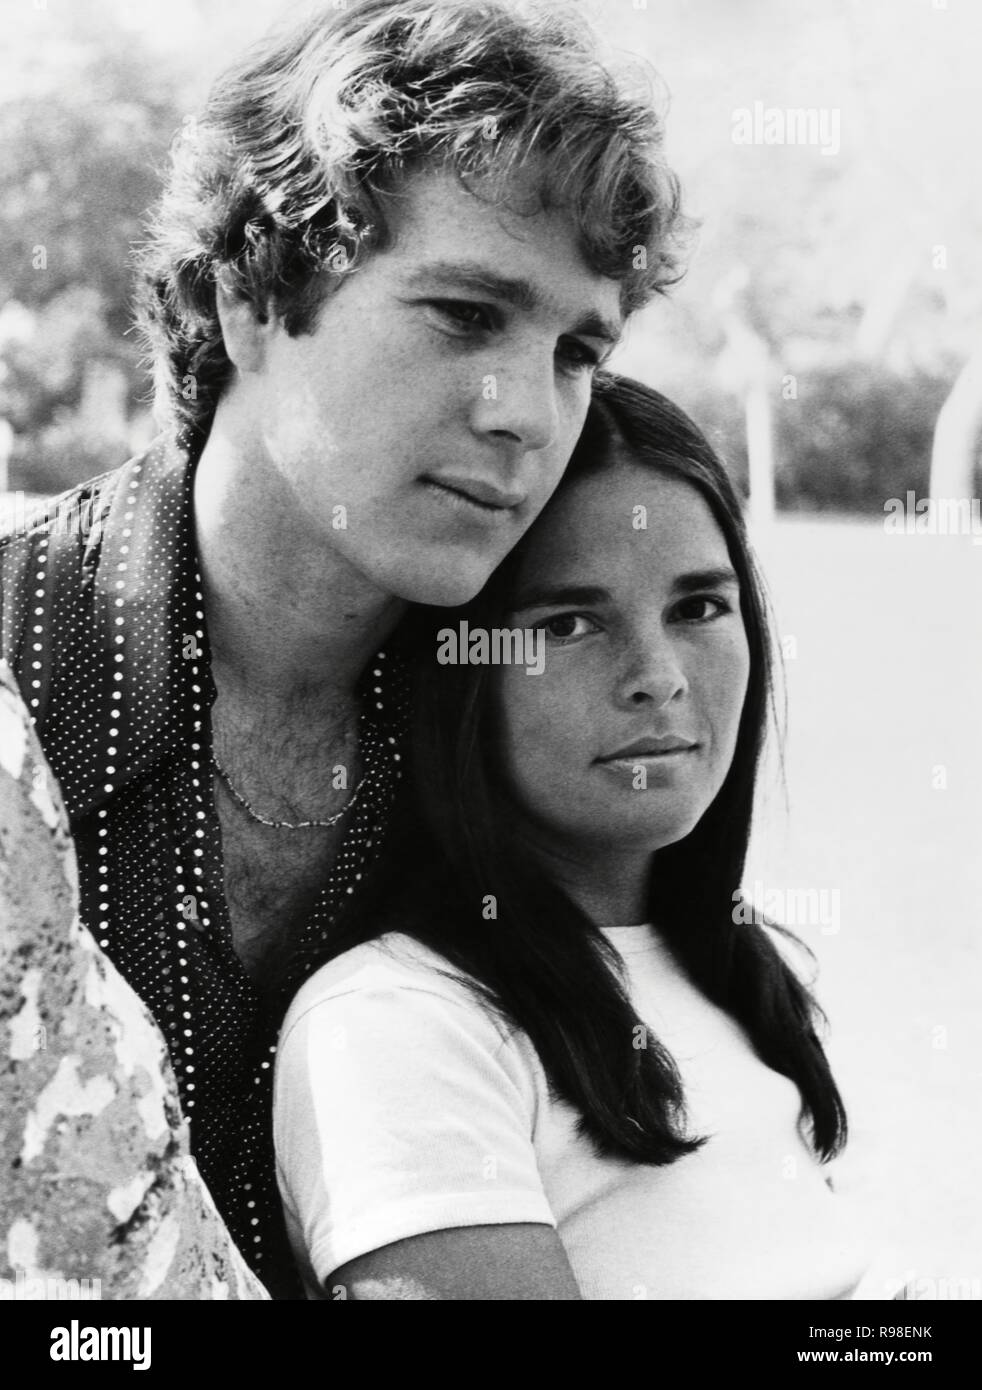 Original film title: LOVE STORY. English title: LOVE STORY. Year: 1970. Director: ARTHUR HILLER. Stars: ALI MACGRAW; RYAN O'NEAL. Credit: PARAMOUNT PICTURES / Album Stock Photo